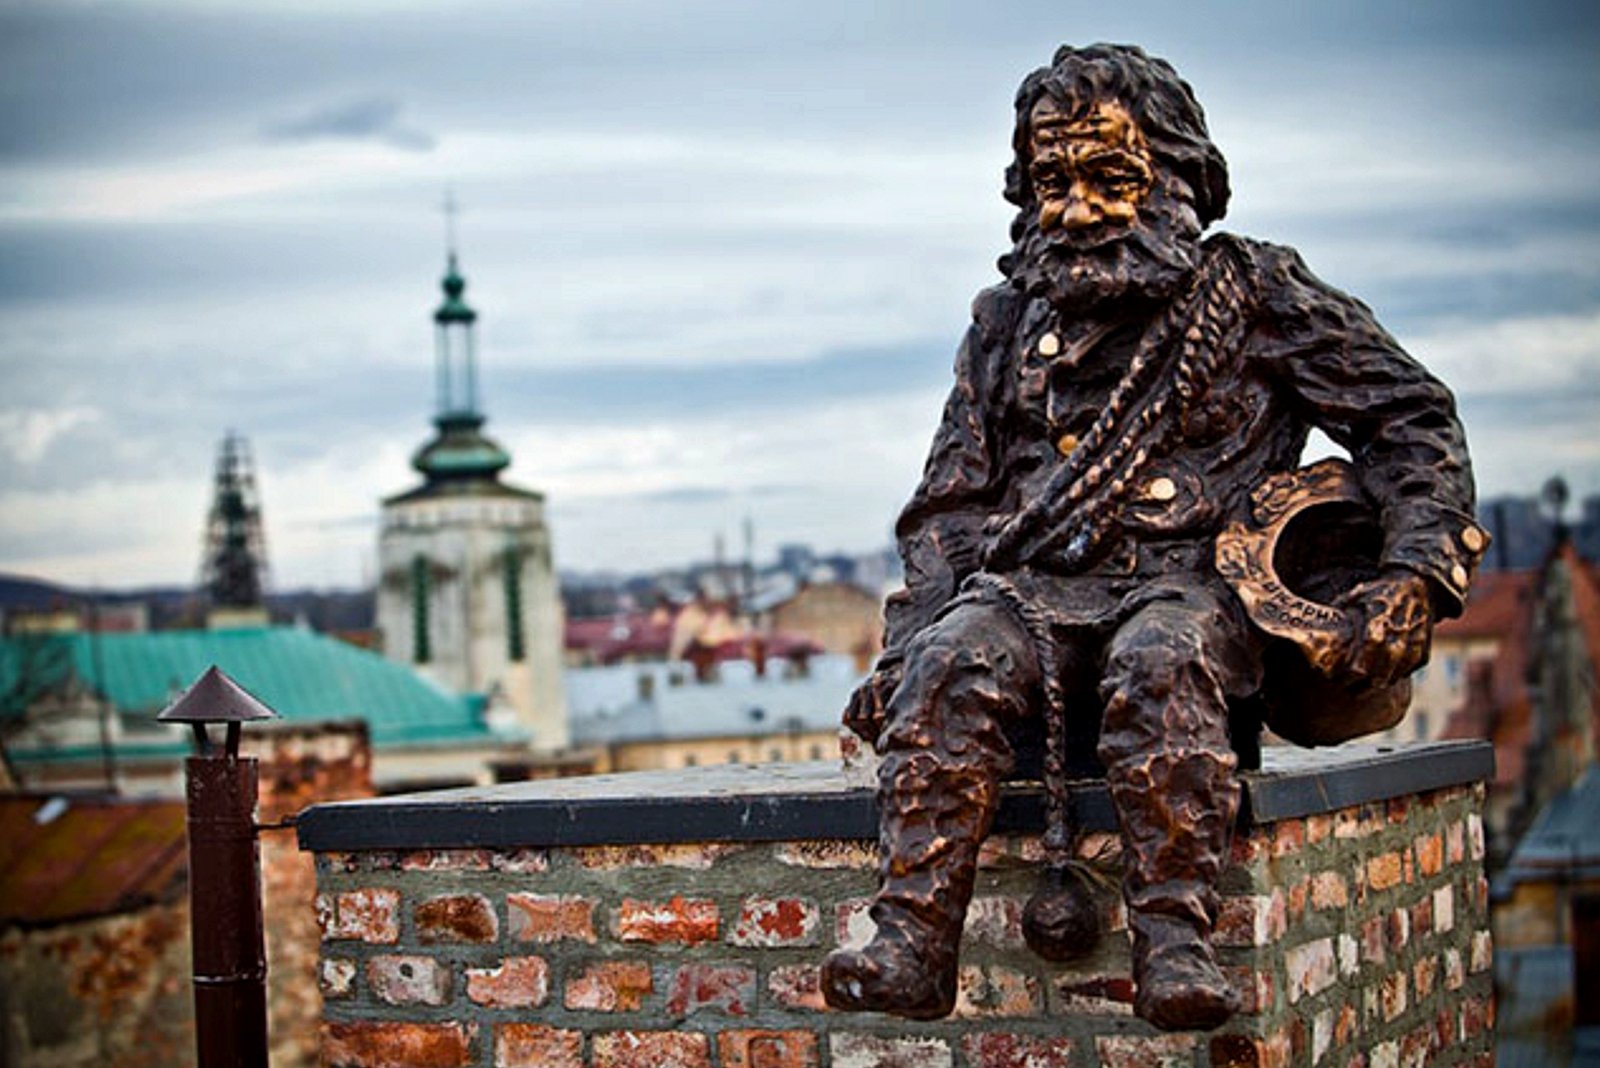 How to make a wish at the pipe chimney monument in Lviv